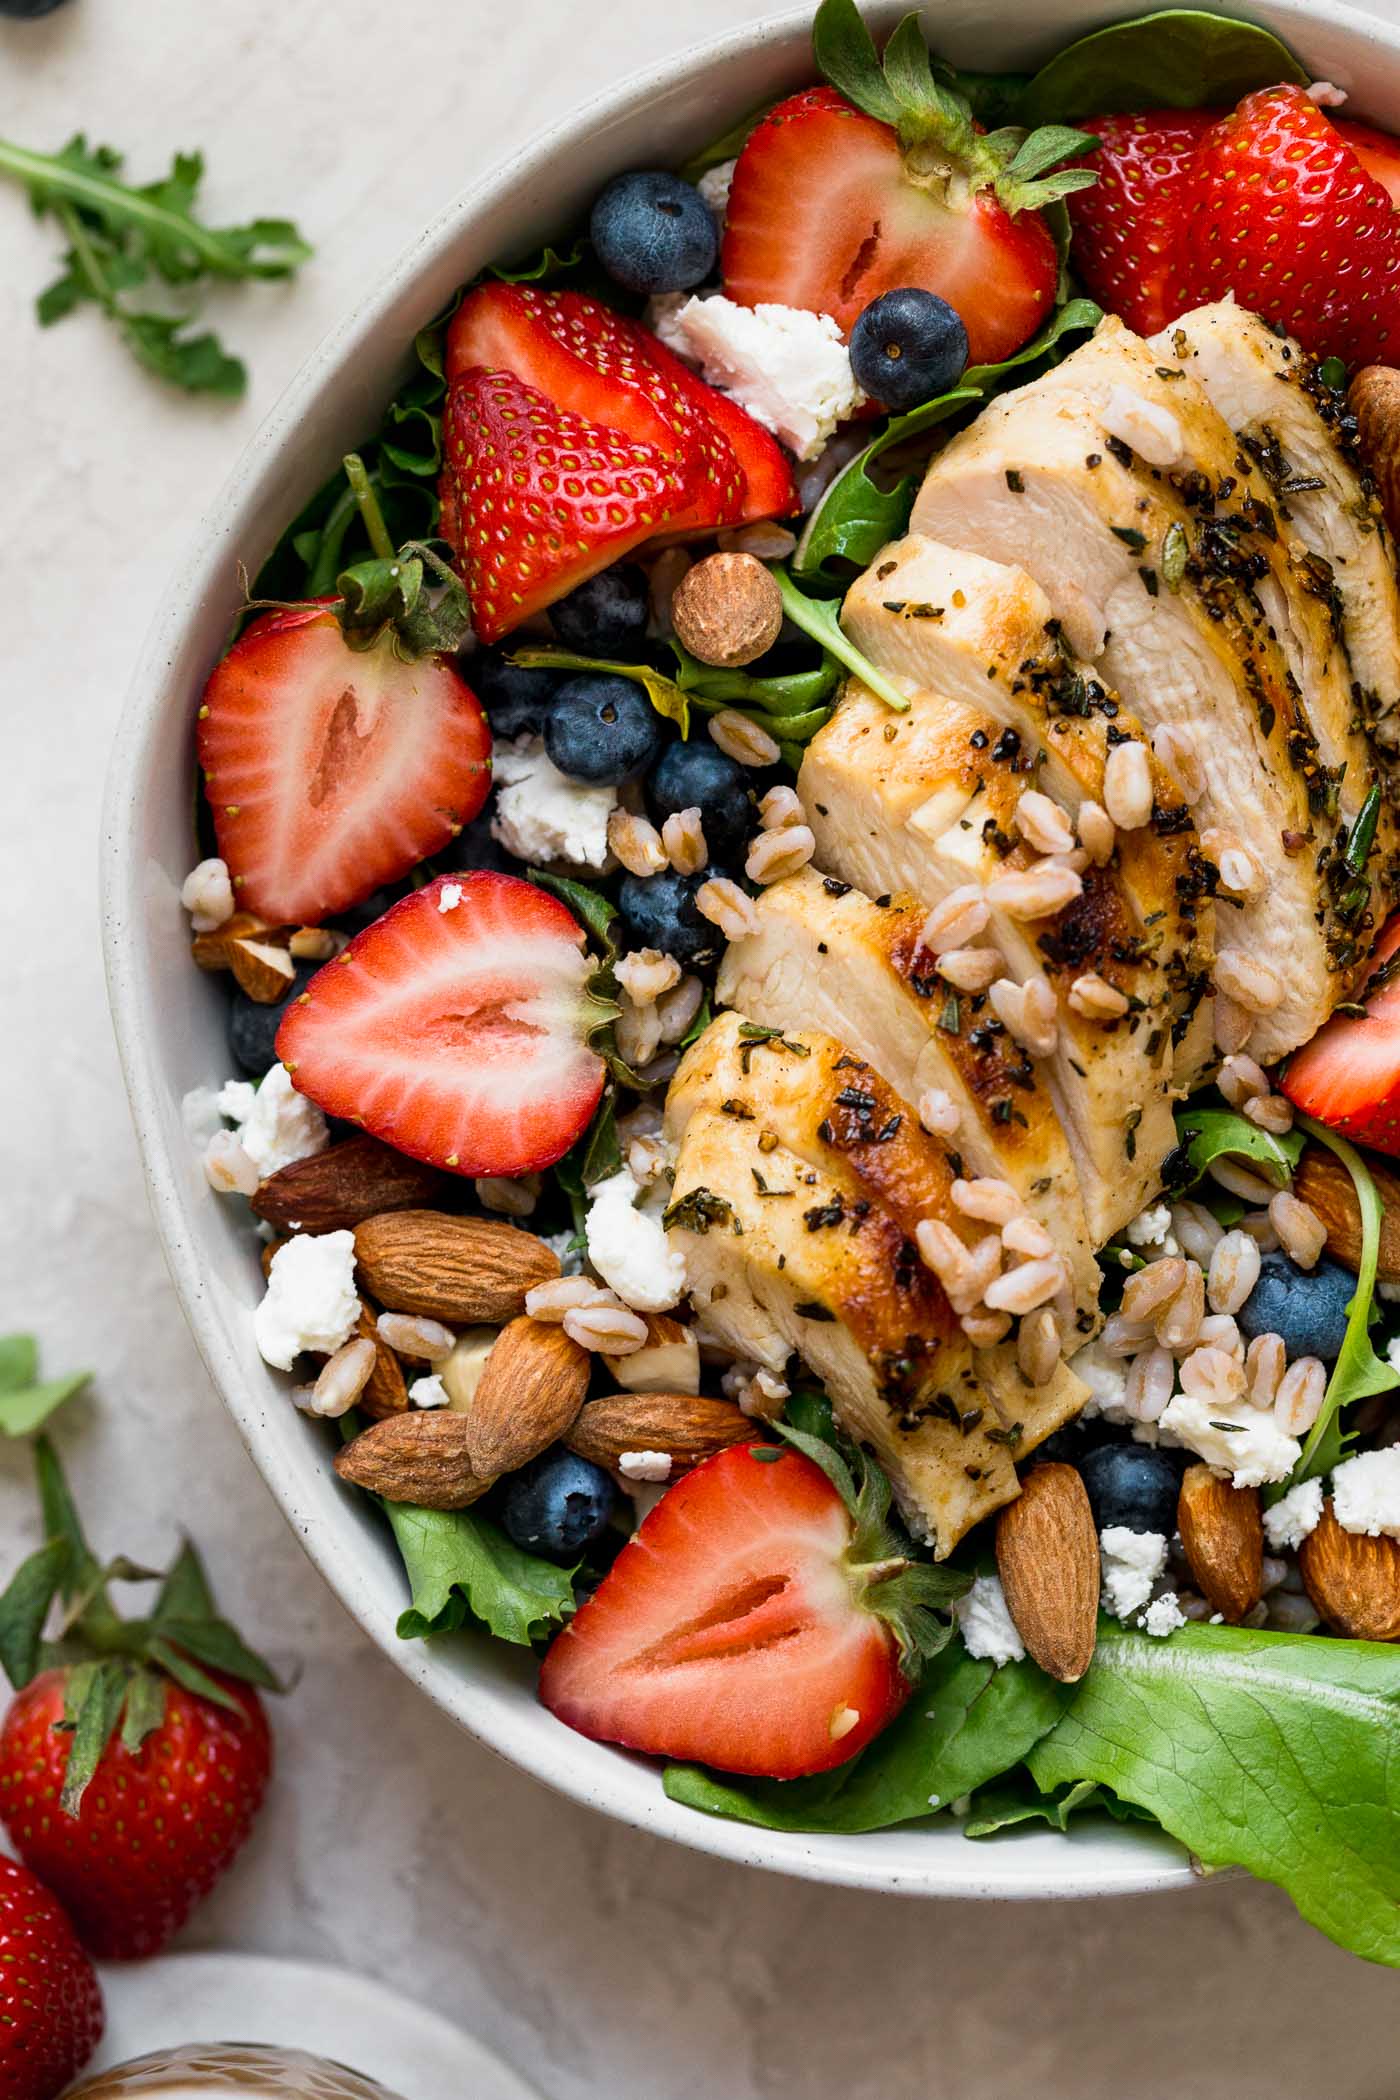 an easy & healthy strawberry salad just in time for spring!!! this strawberry salad is loaded with sweet strawberries & blueberries, tangy goat cheese, chopped almonds, farro, and gets topped with simple grilled chicken breast and drizzles of the most amazing homemade maple balsamic vinaigrette. the perfect healthy salad for meal prep, an easy weeknight dinner, or for summer entertaining! #playswellwithbutter #saladrecipe #strawberrysalad #healthyrecipe #lowcarbrecipe #balsamicvinaigrette